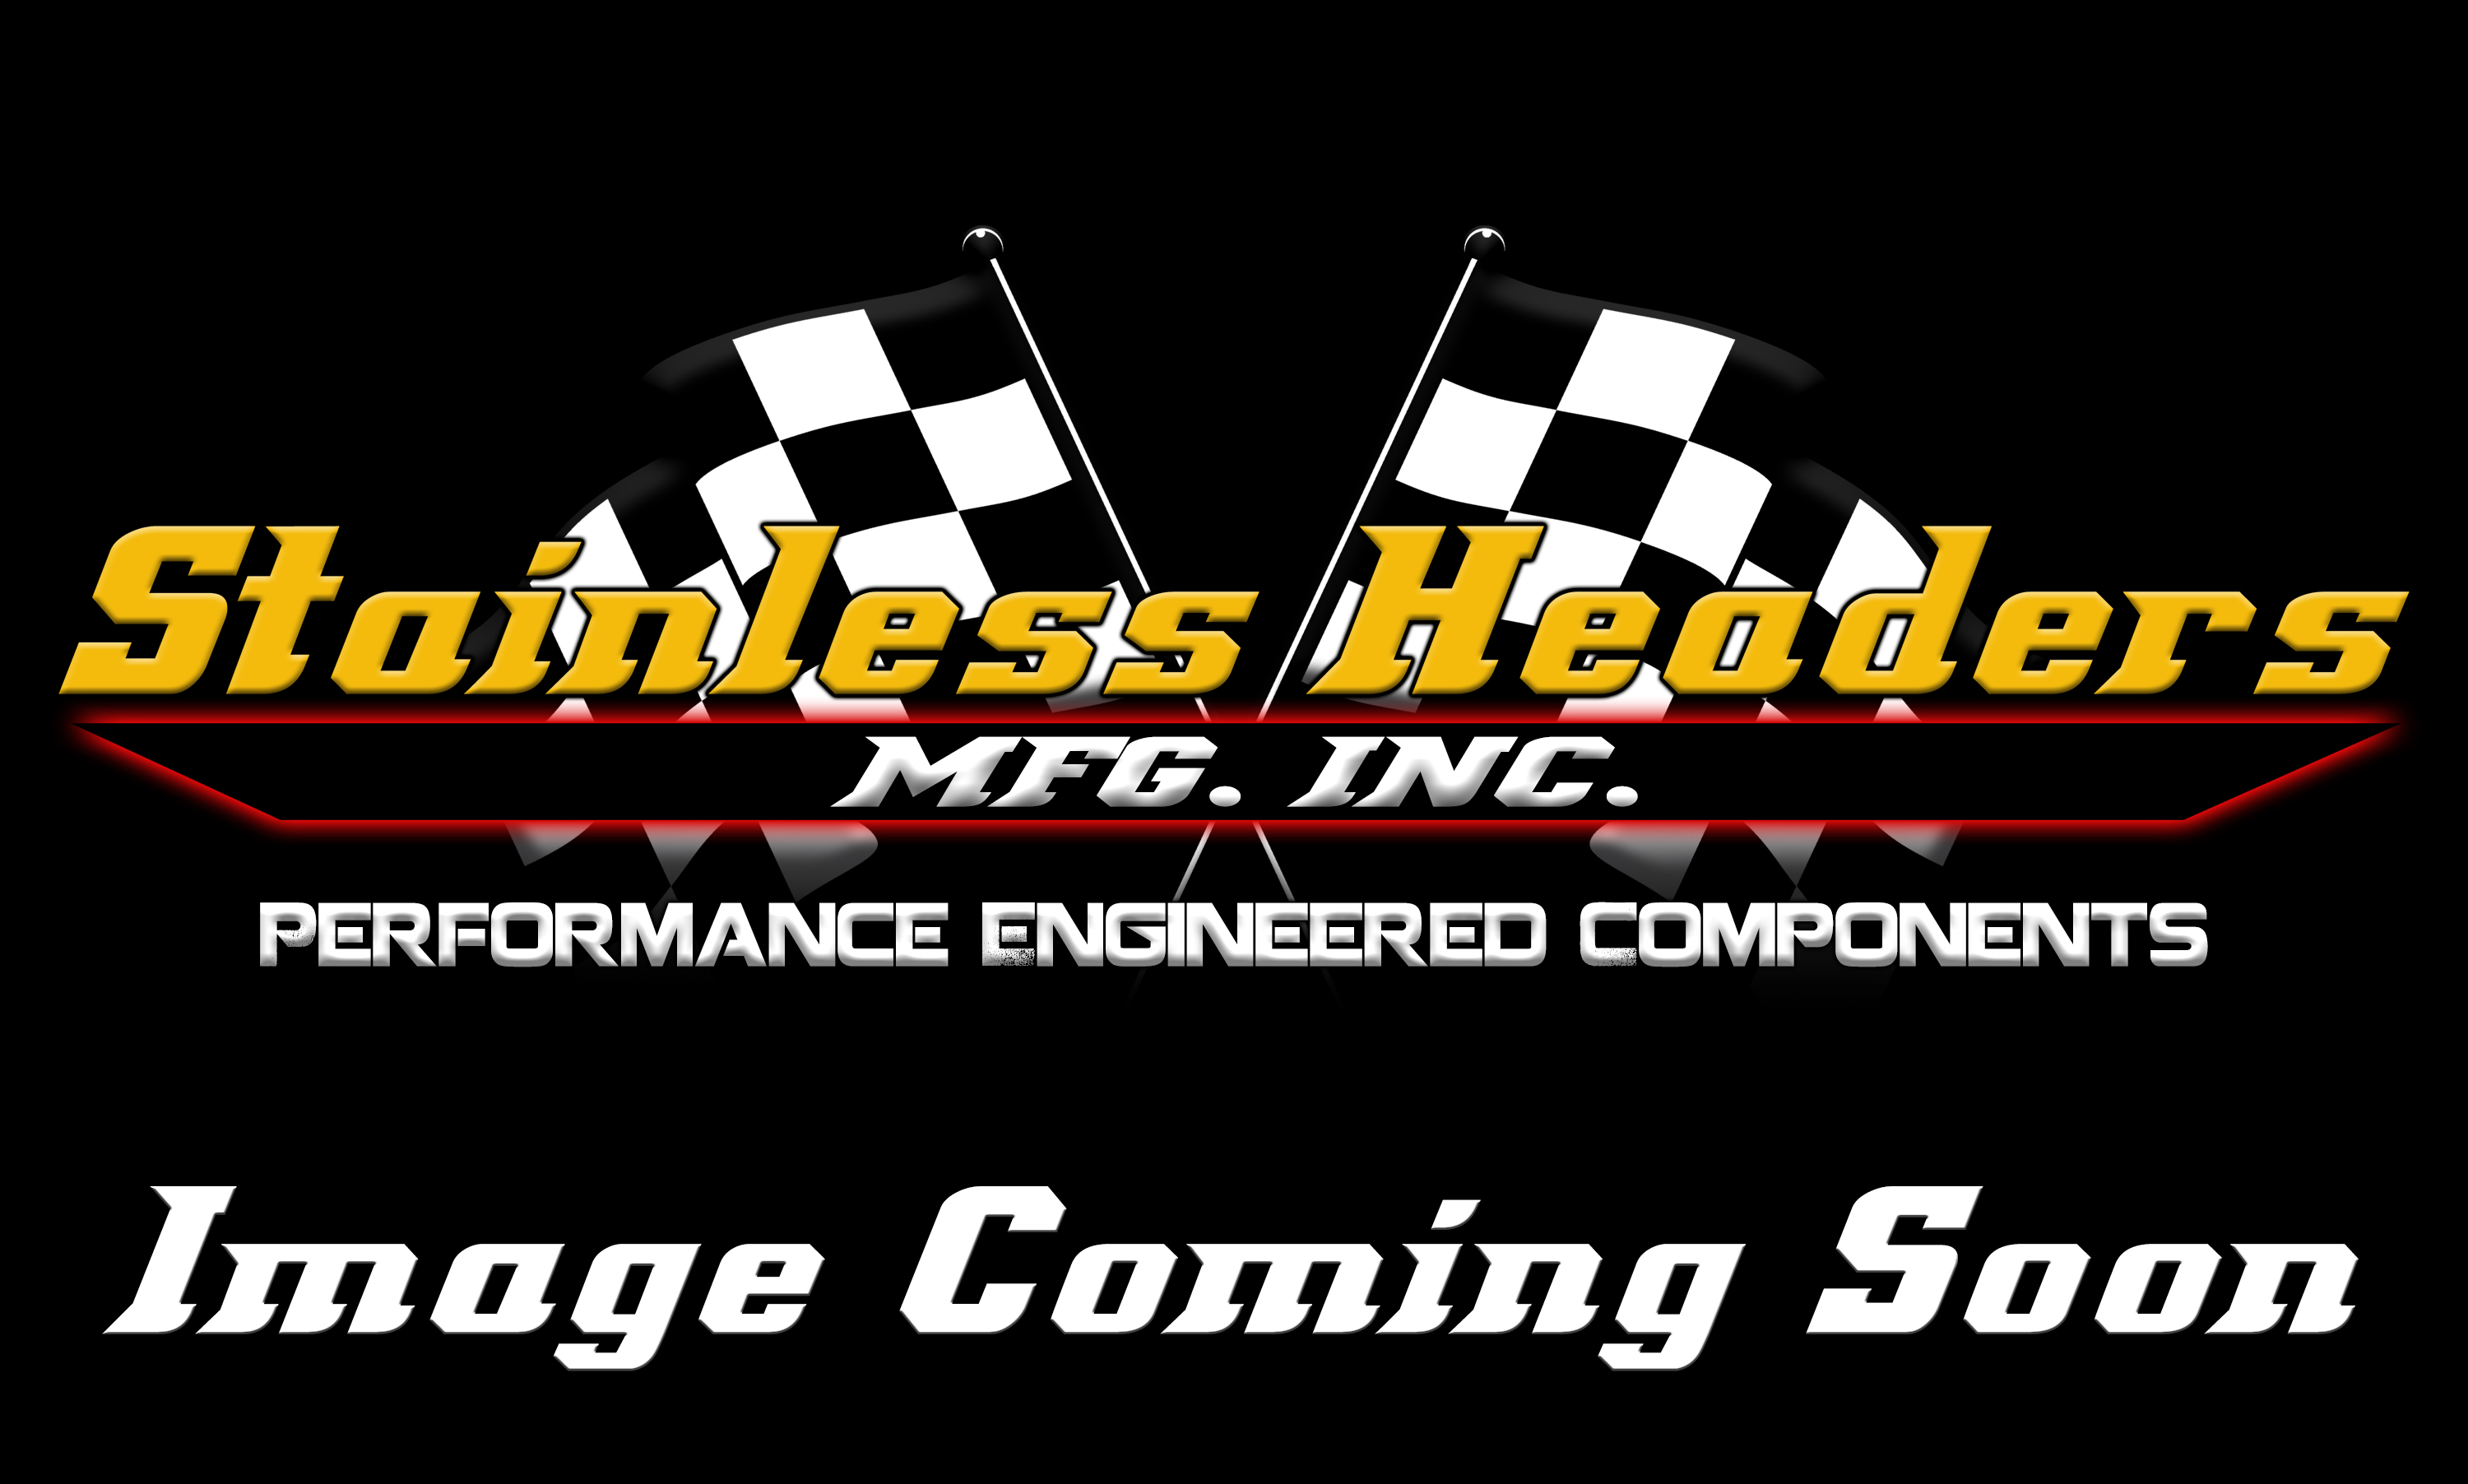 Stainless Headers - 1 3/4" Primary 4 into 1 Performance Merge Collector-16ga 304ss